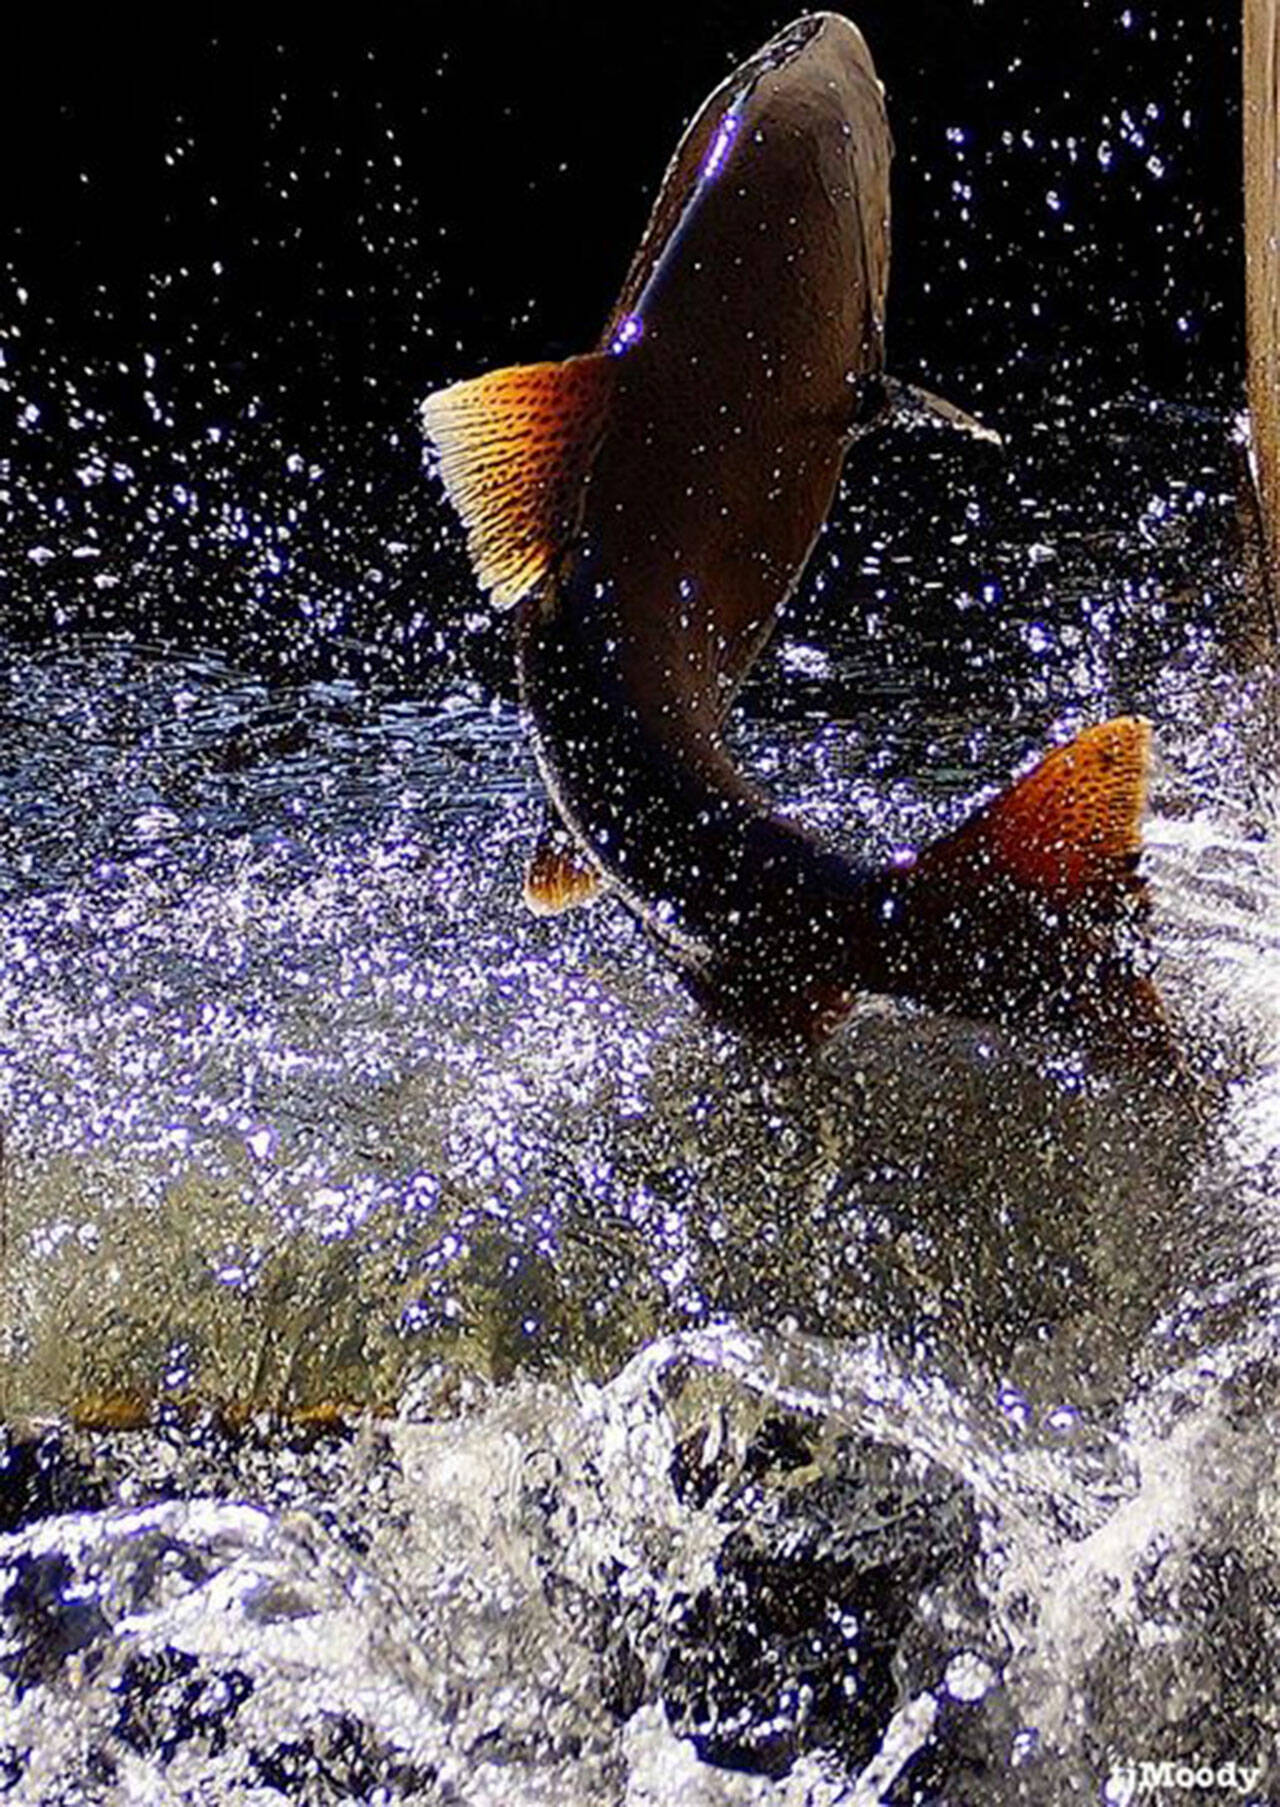 A salmon moves through the water during Salmon Days in Issaquah. File photo courtesy of T.J. Moody